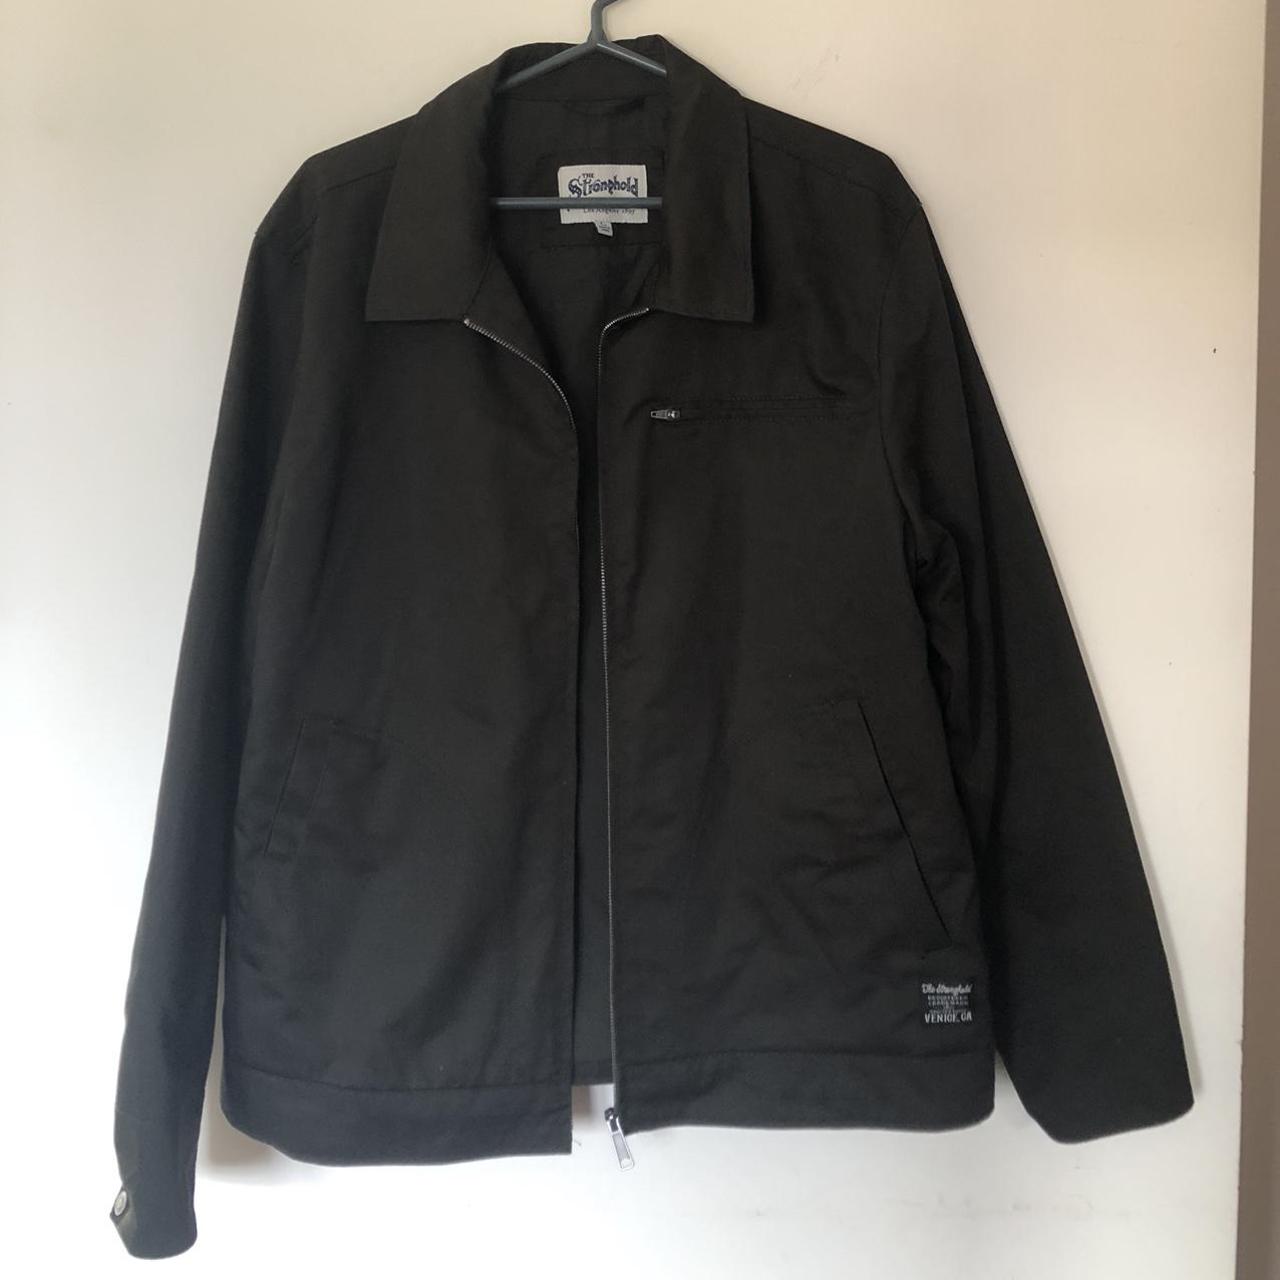 Amazing condition ‘The Stronghold’ jacket, carhartt... - Depop